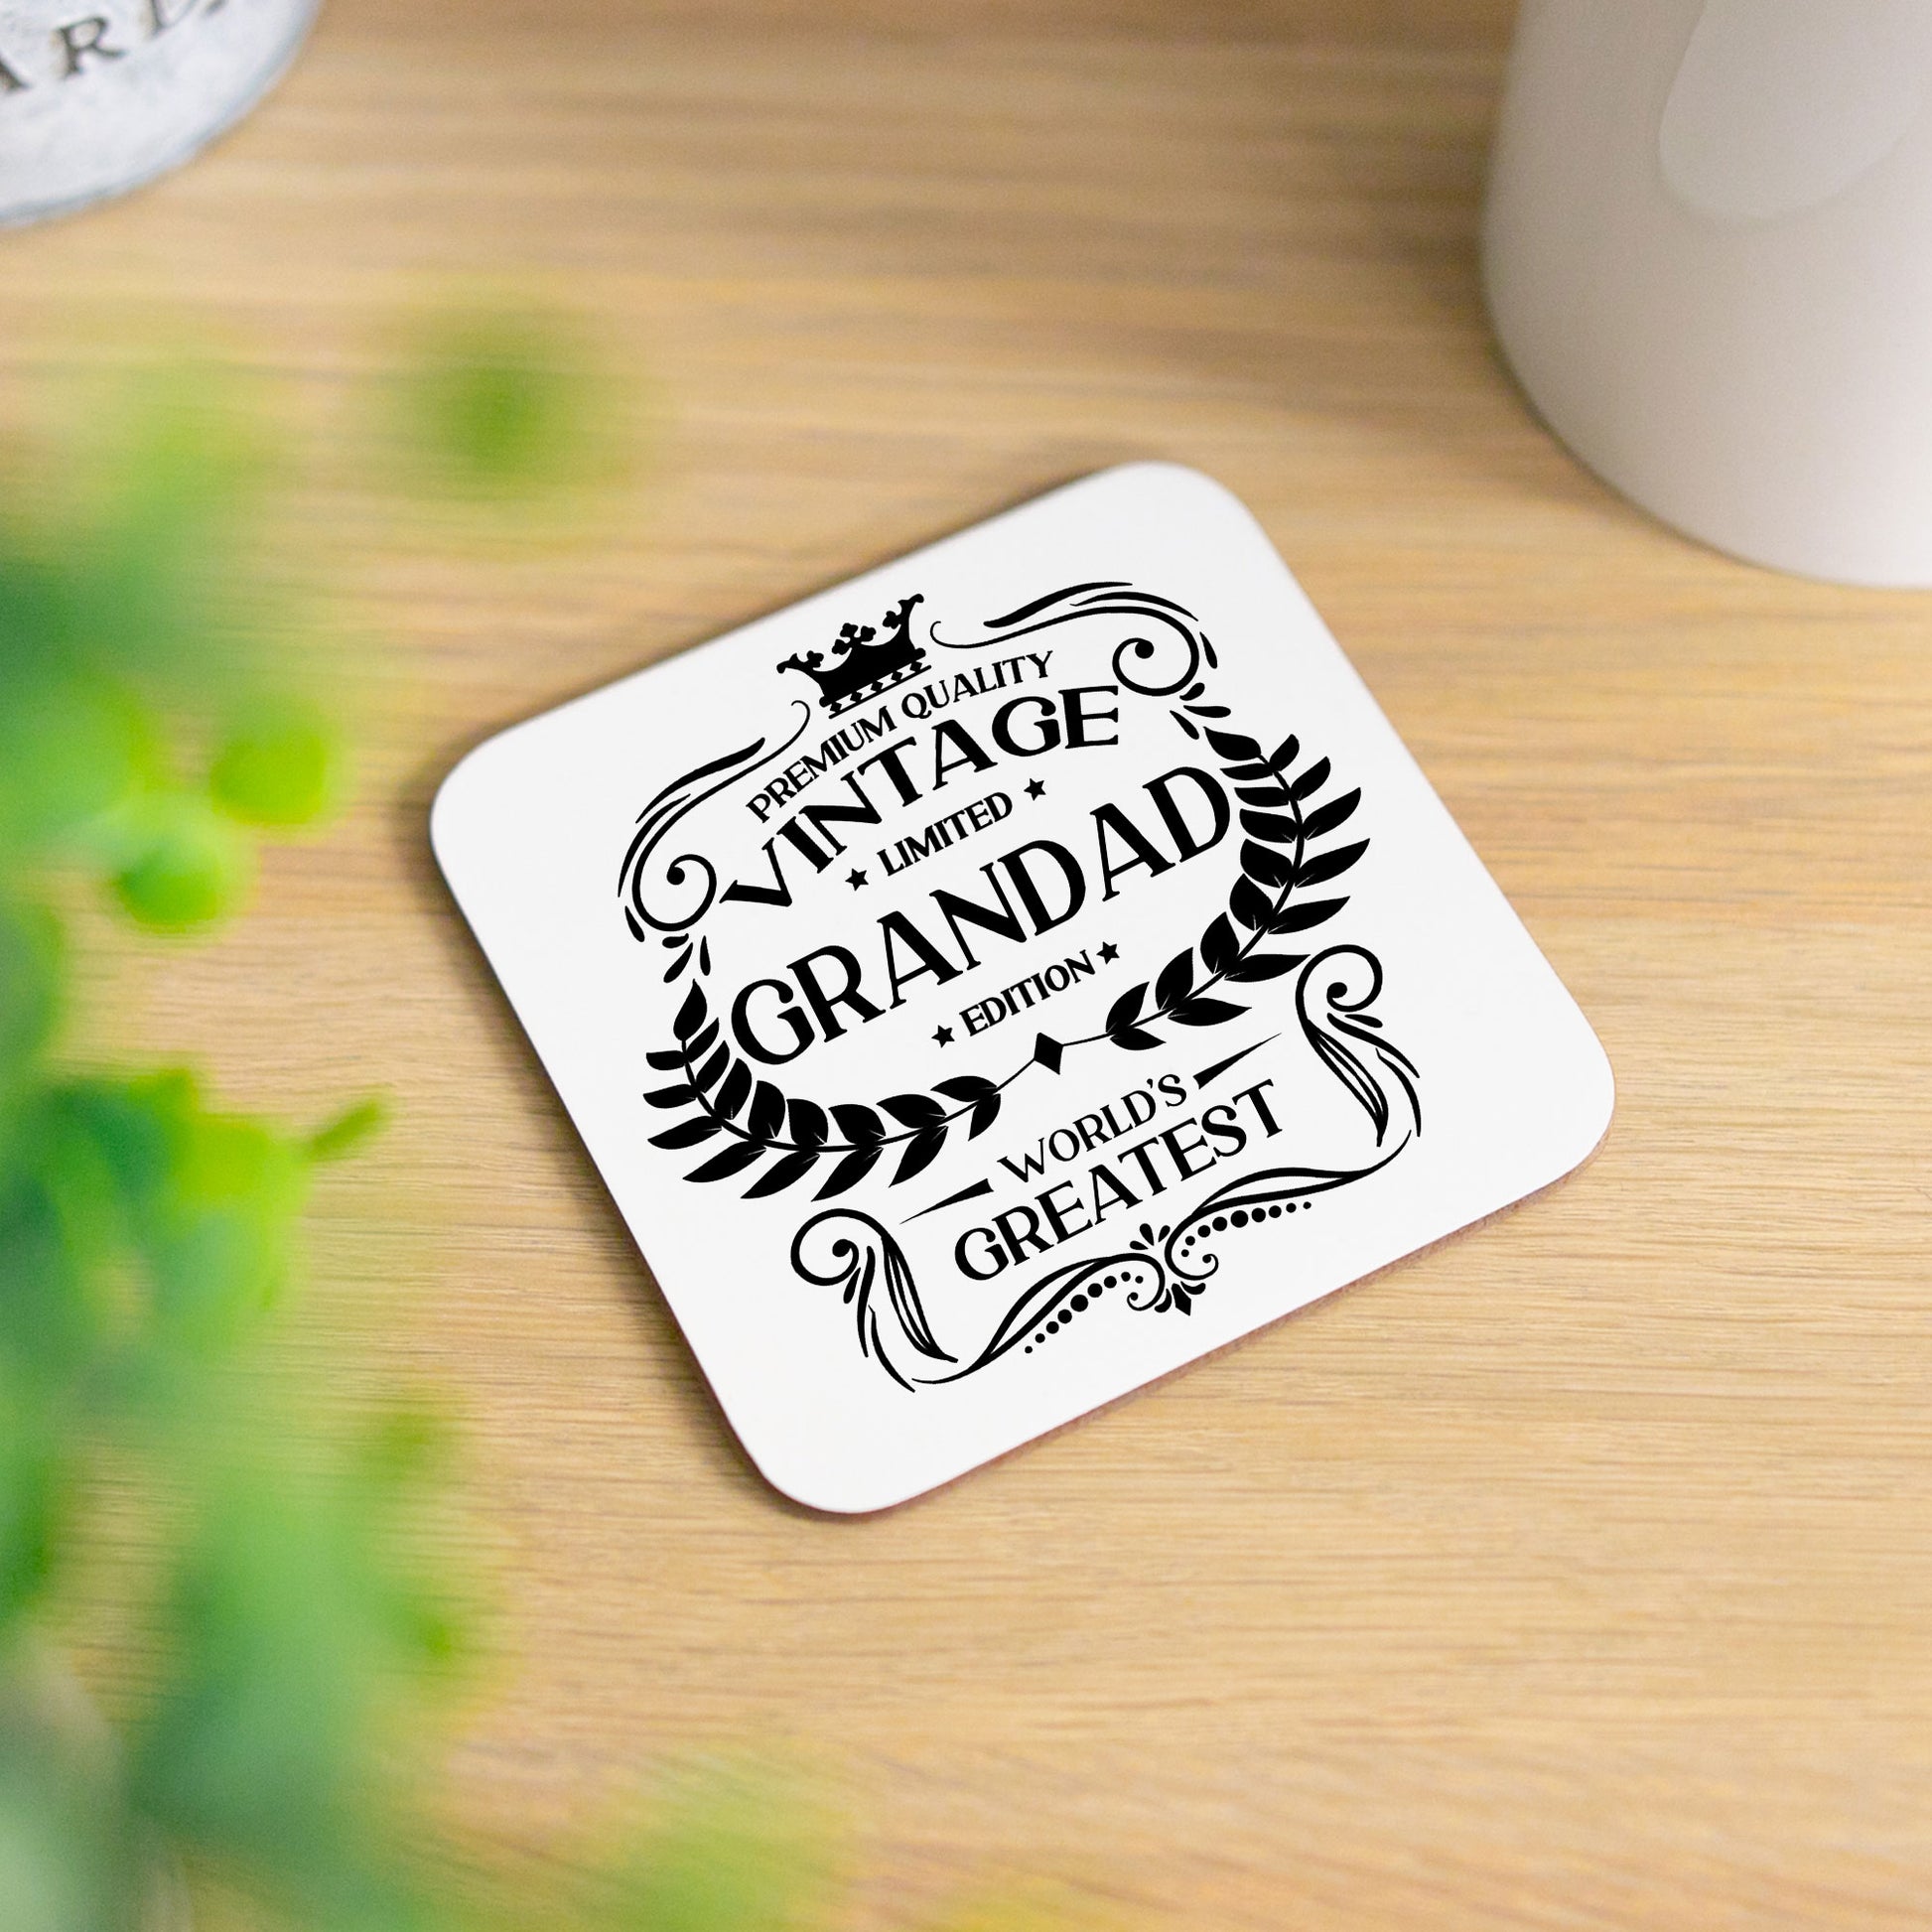 Vintage World's Greatest Grandad Engraved Gin Glass Gift  - Always Looking Good - Glass & Printed Coaster  